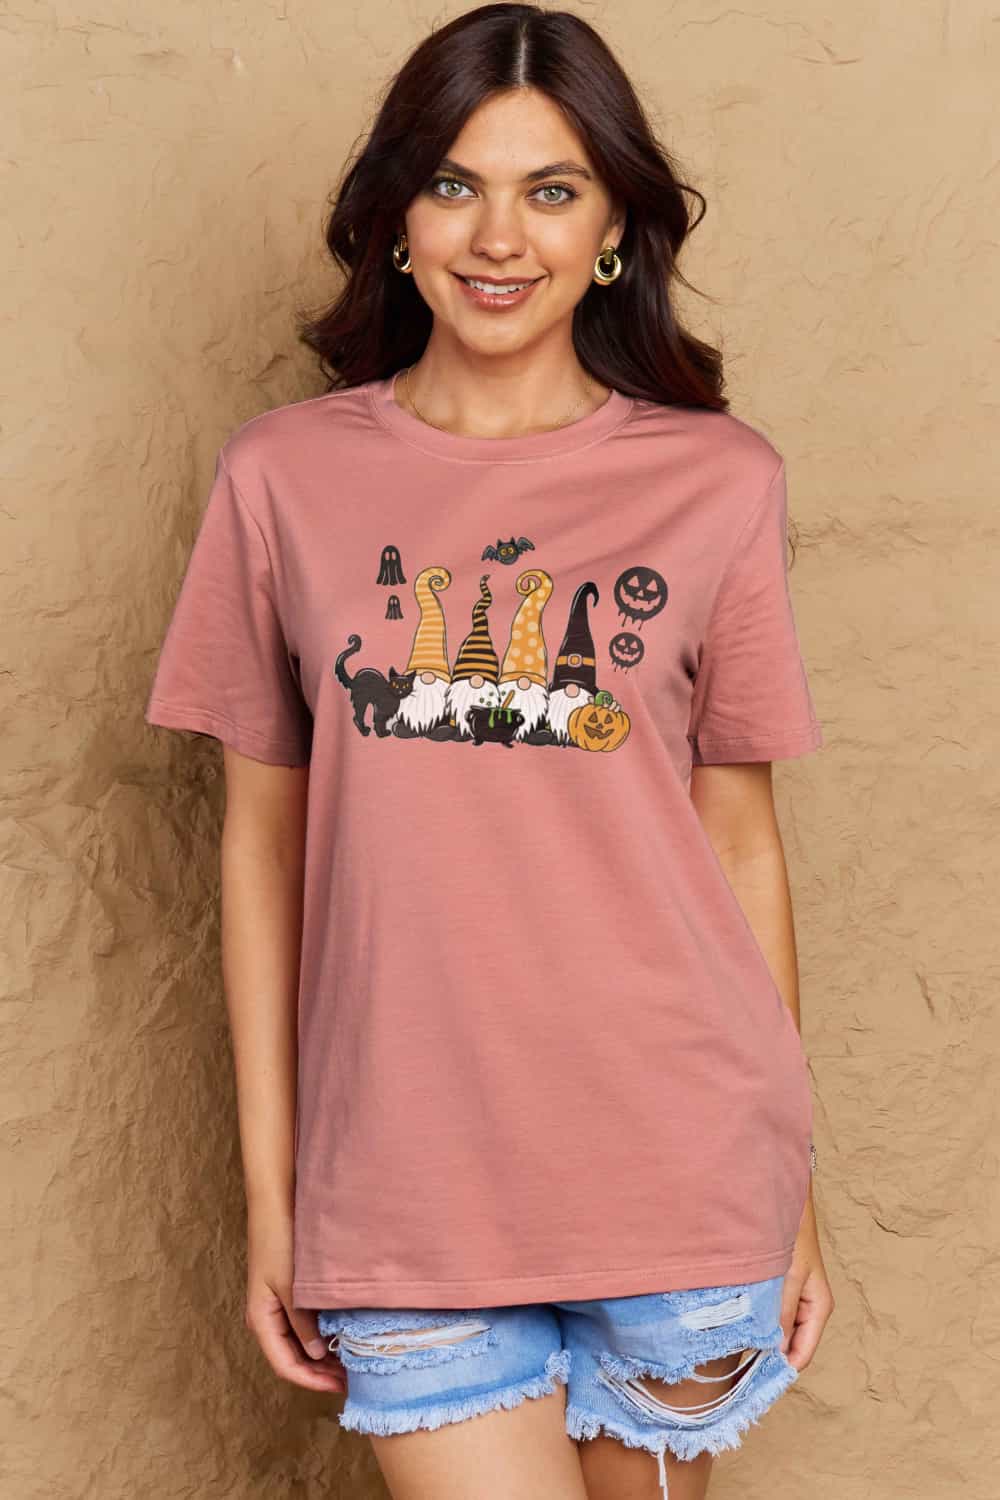 Full Size Halloween Theme Graphic Cotton T-Shirt - Pink / S - T-Shirts - Shirts & Tops - 1 - 2024